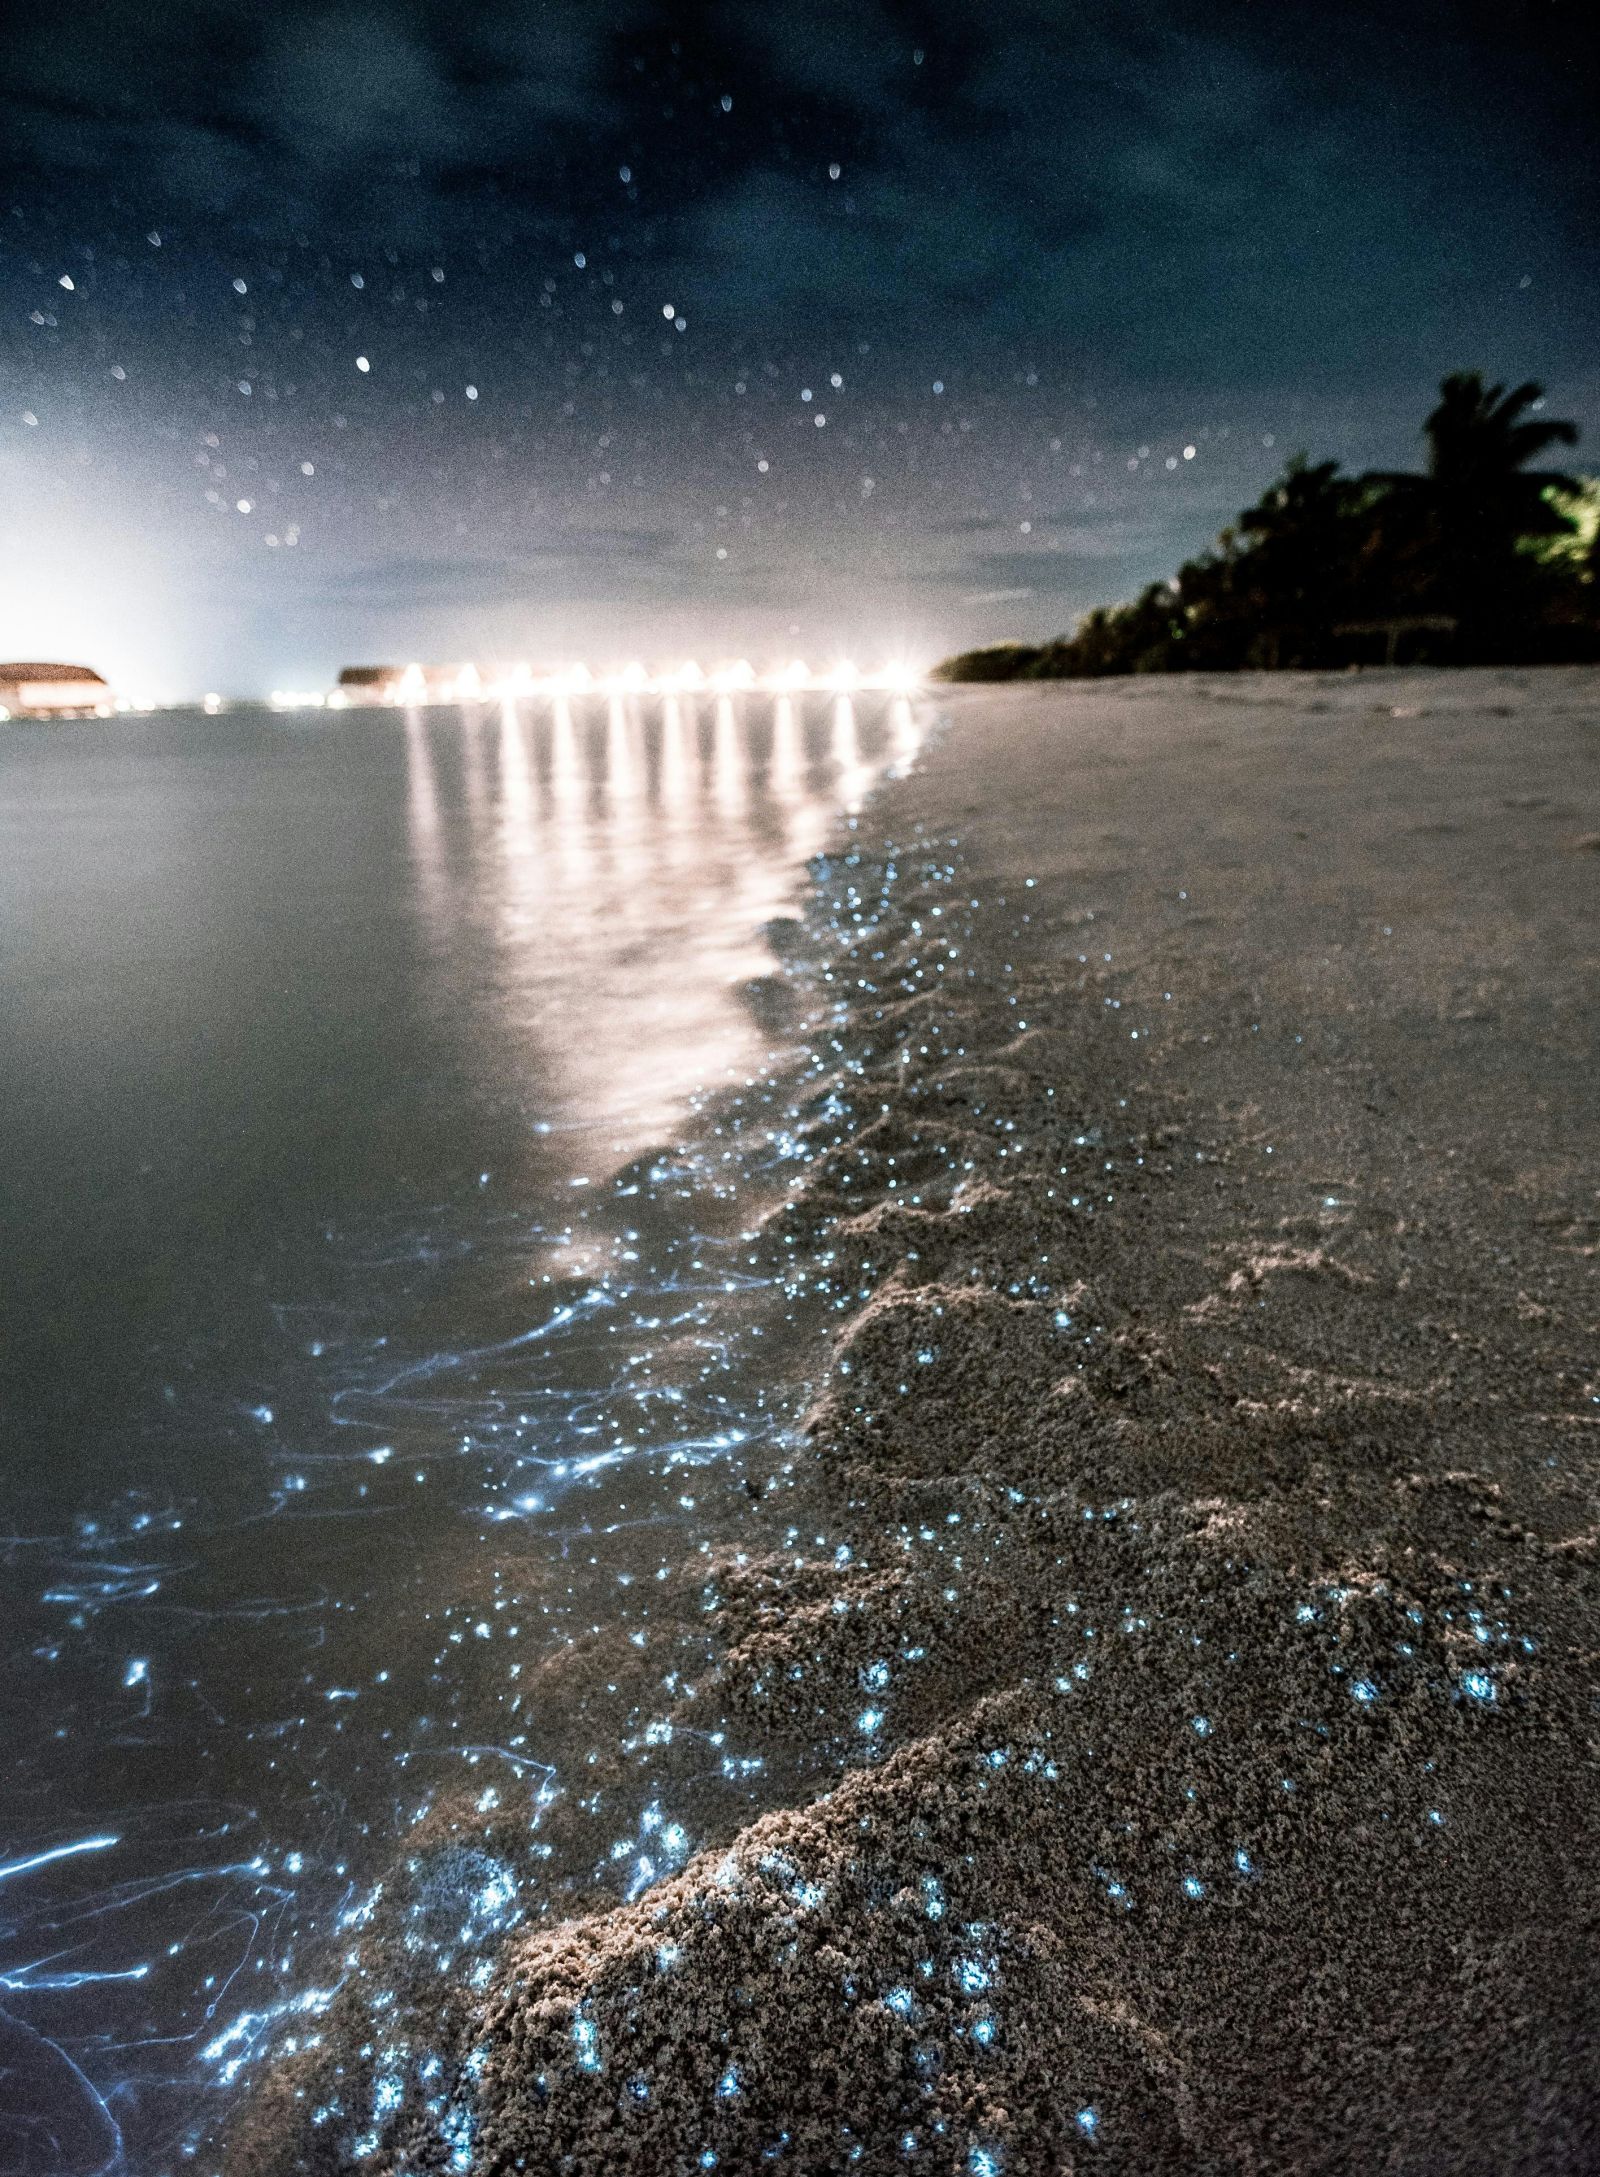 Phytoplankton bioluminescence on the shores of a beach with lights in the background